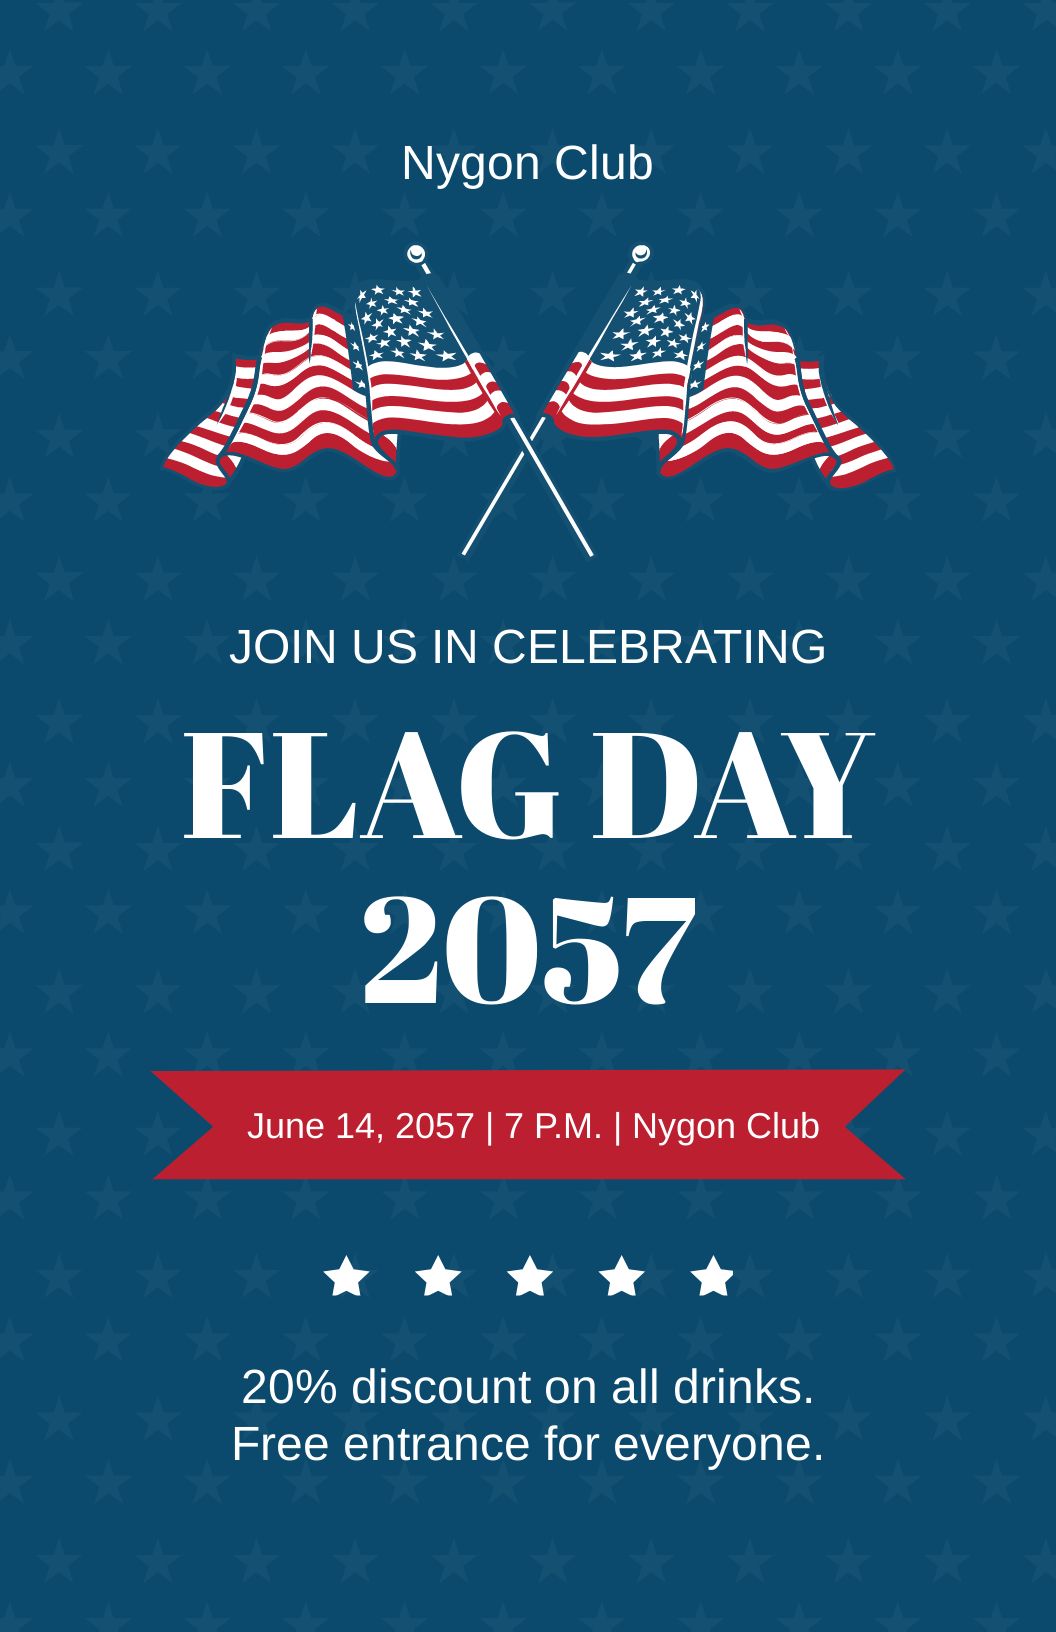 Flag Day Event Poster in Word, Google Docs, Illustrator, PSD, Apple Pages, Publisher